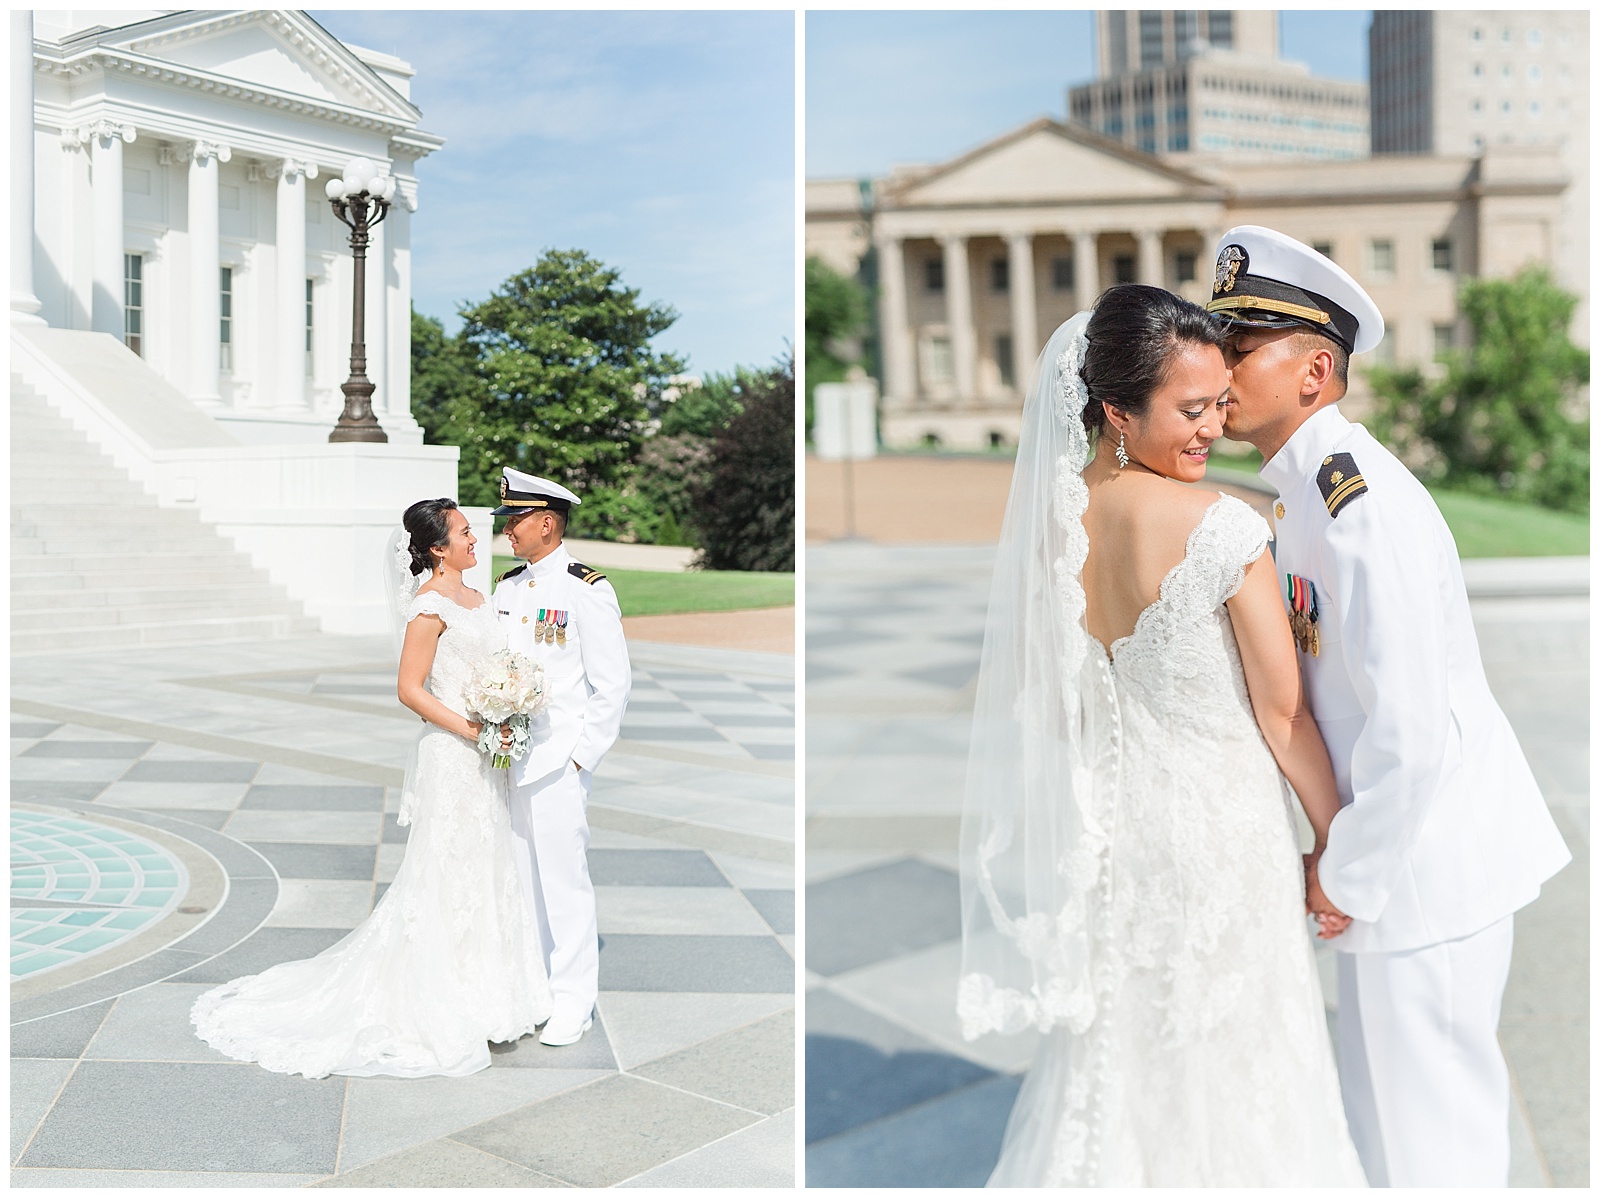 Bride and groom portraits at the virginia state capital building 